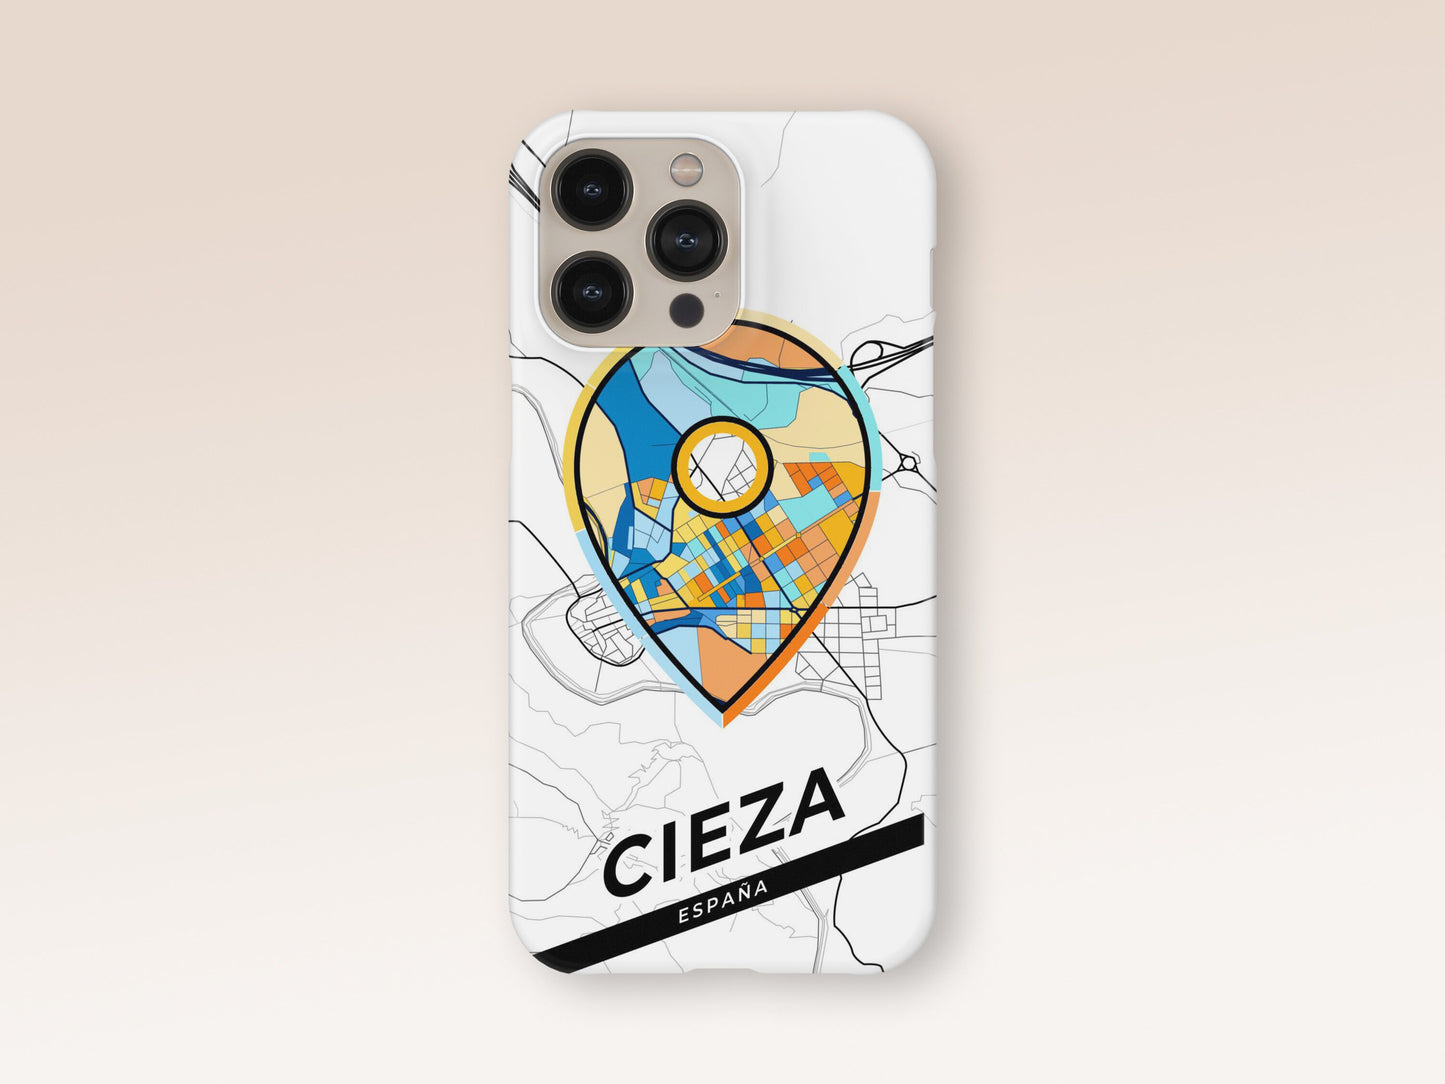 Cieza Spain slim phone case with colorful icon. Birthday, wedding or housewarming gift. Couple match cases. 1